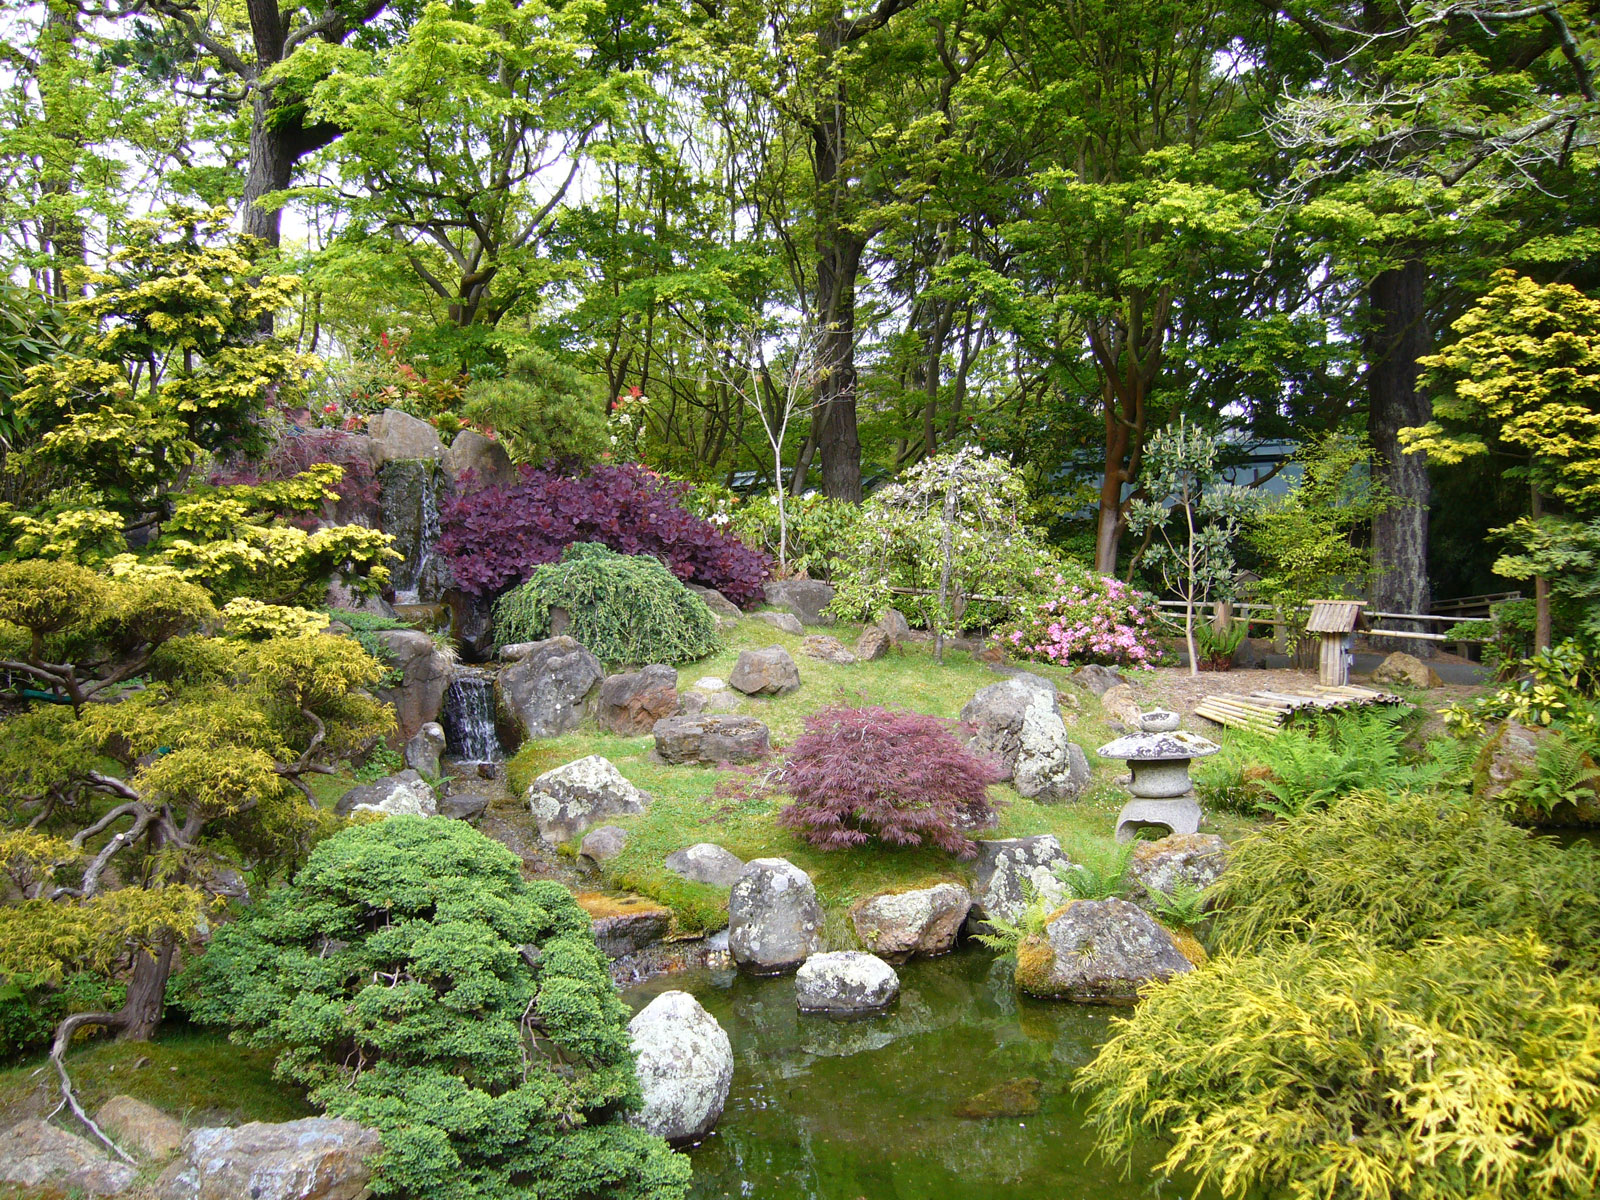 Japanese Garden With Charming Japanese Garden Design Ideas With Fountains Furnished With Neat Green Grass Completed With Flowers And Hodgepodge Trees In The Garden Garden Garden Design Ideas As The Additional Decoration For Enhancing House